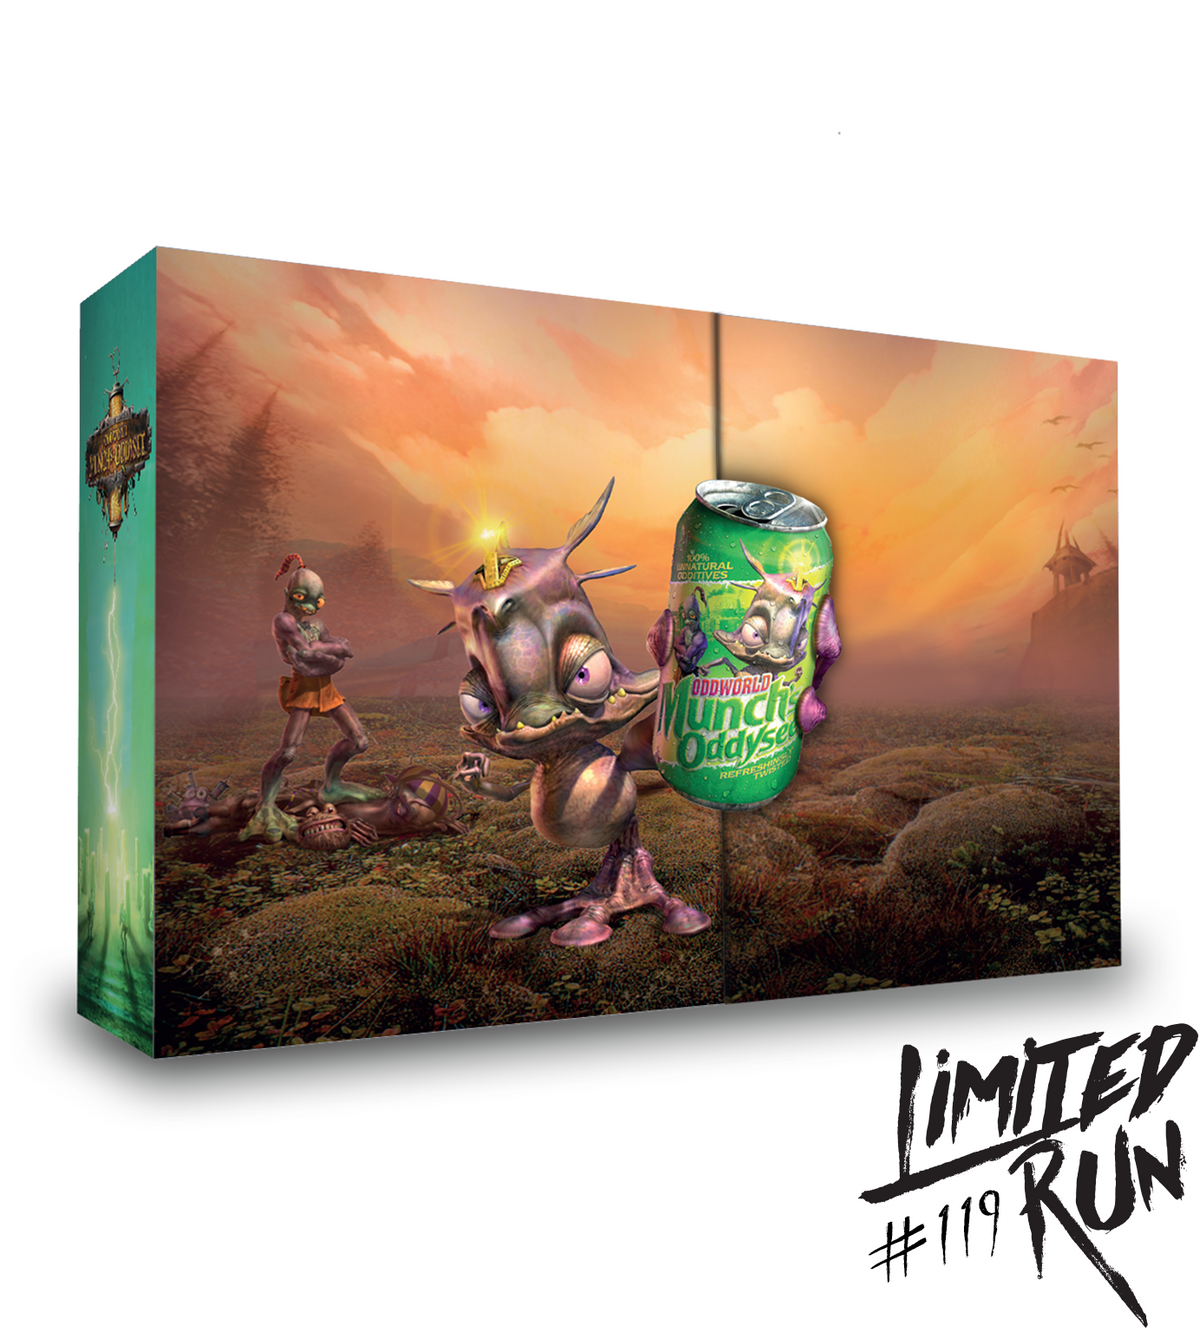 Limited Run #119: Munch's Oddysee Collector's Edition (Vita)